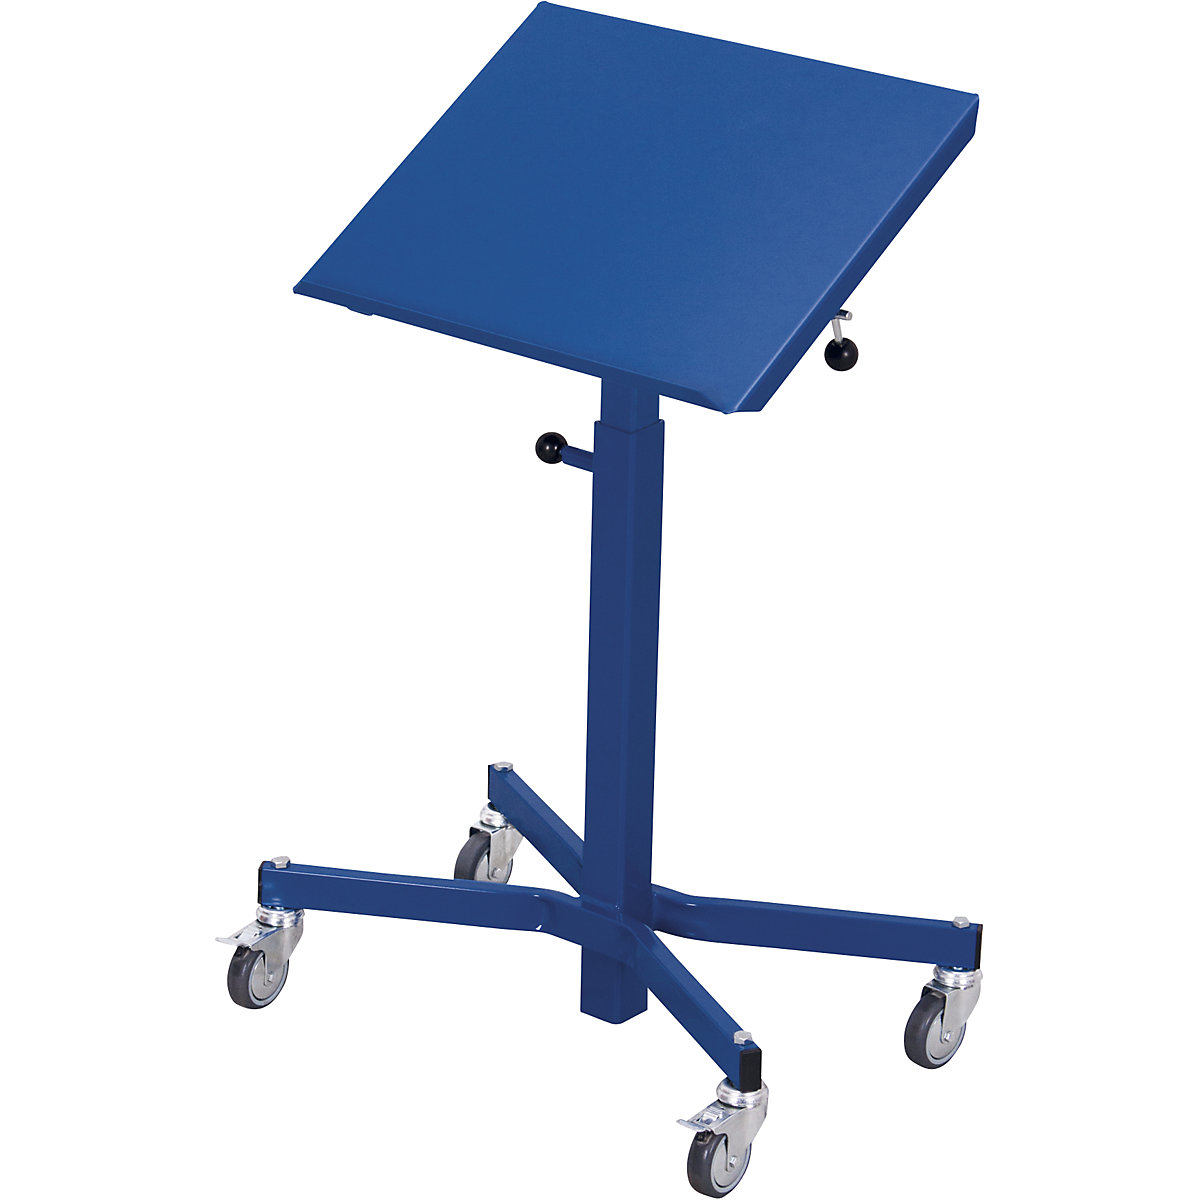 Material stand, tilting